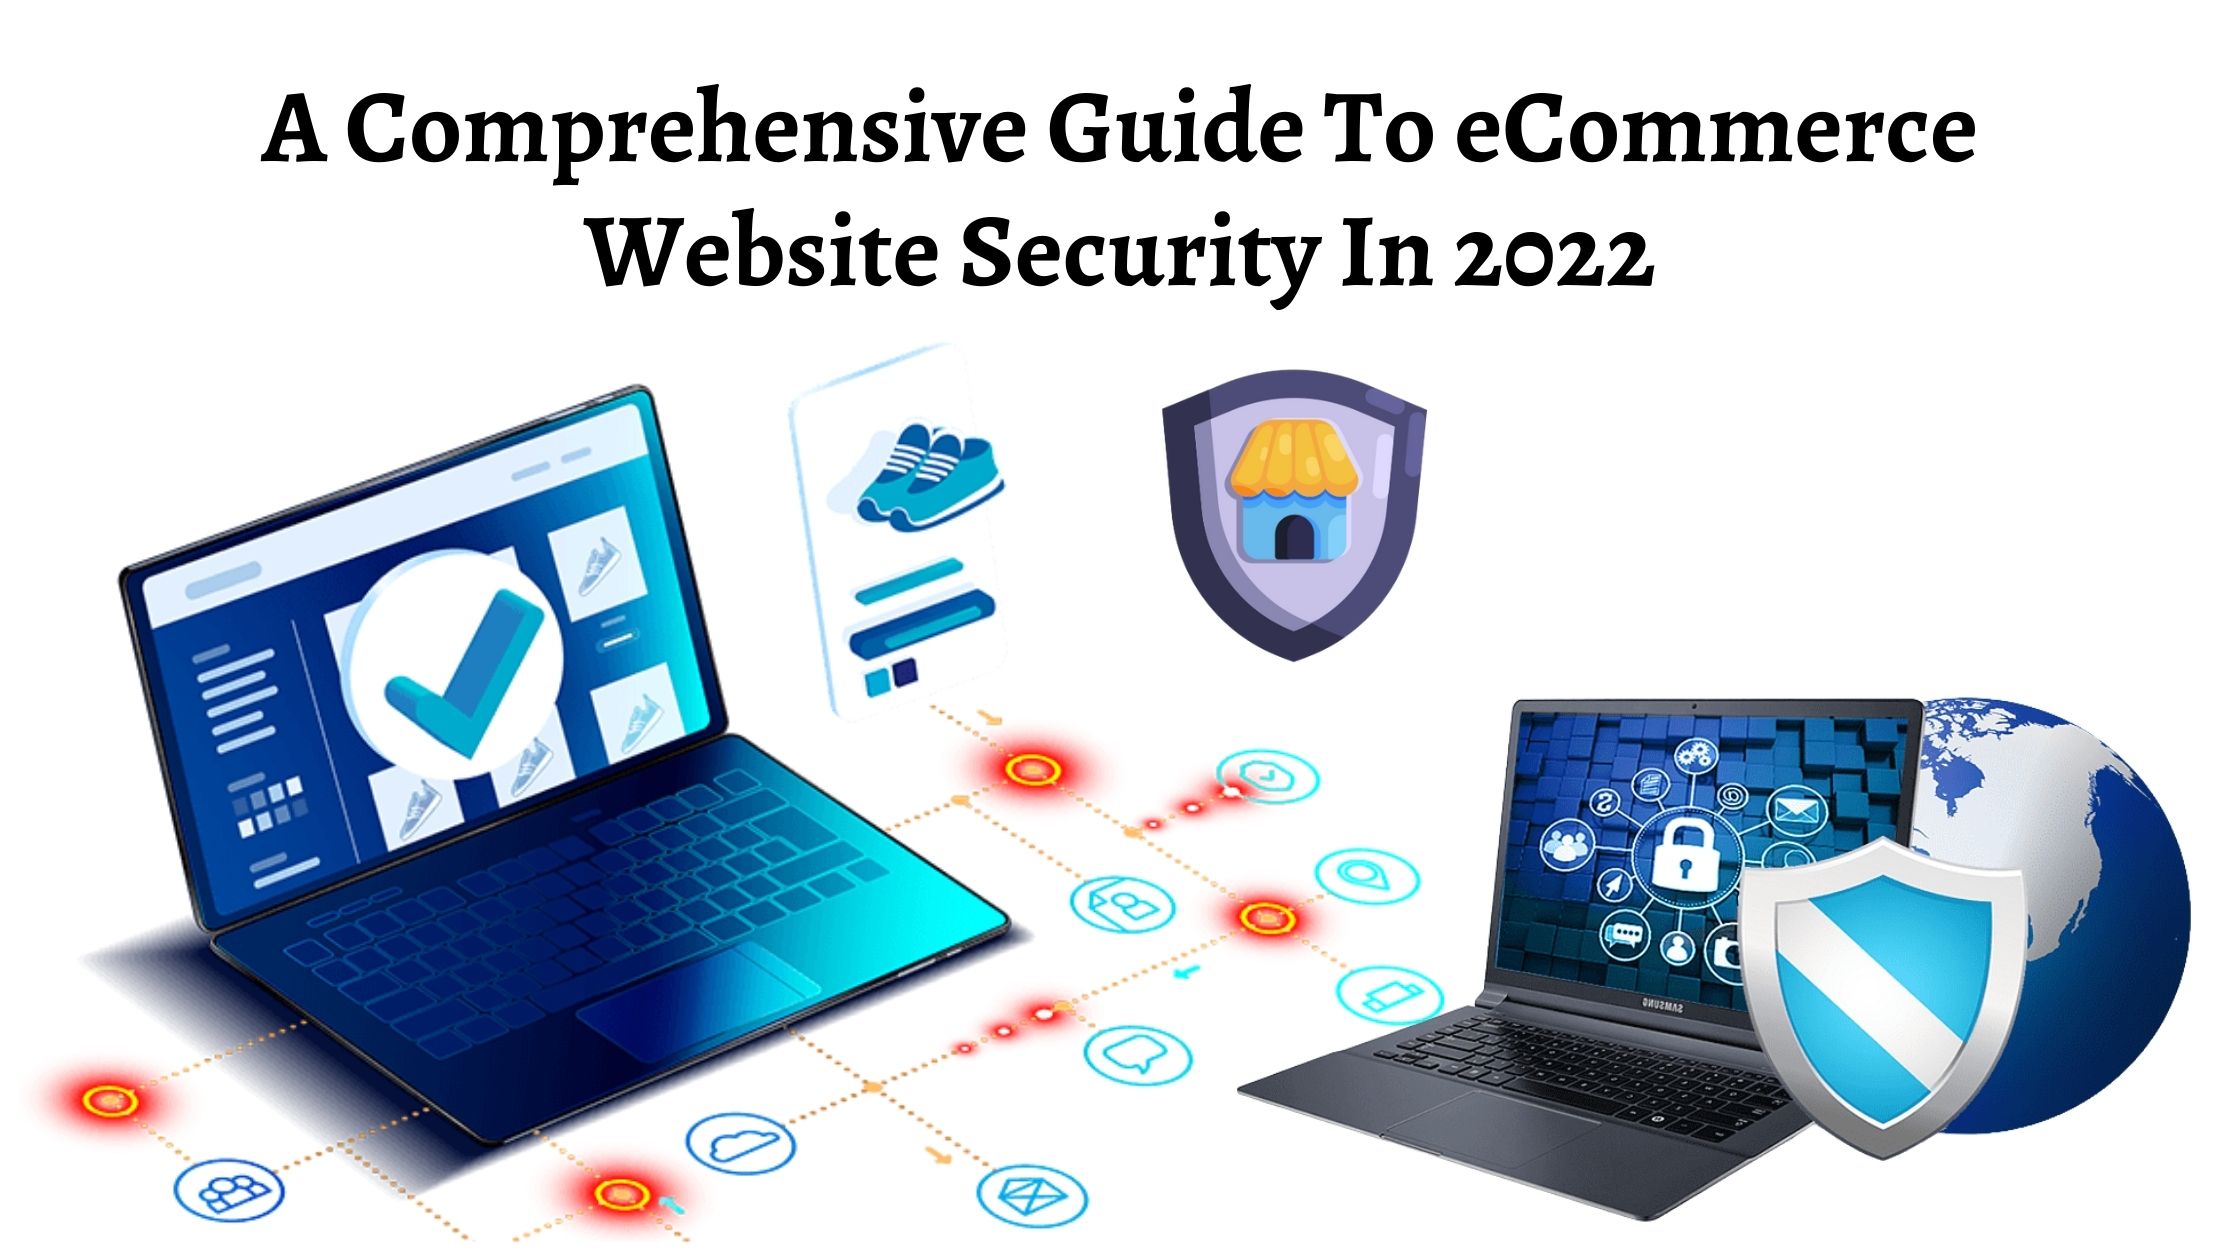 A Comprehensive Guide To eCommerce Website Security In 2022